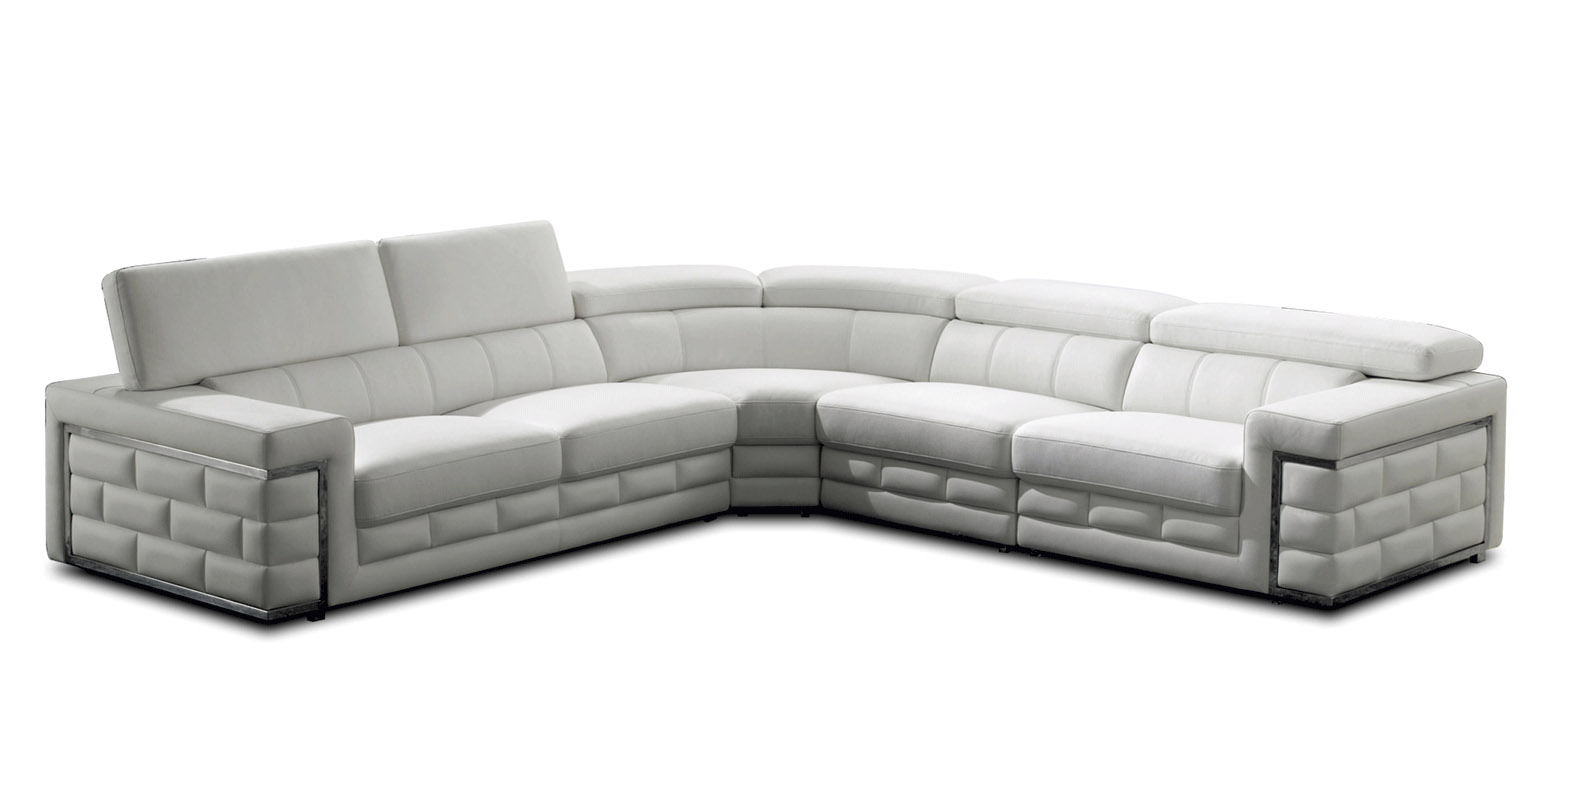 Adjustable Advanced Quality Leather L-shape Sectional